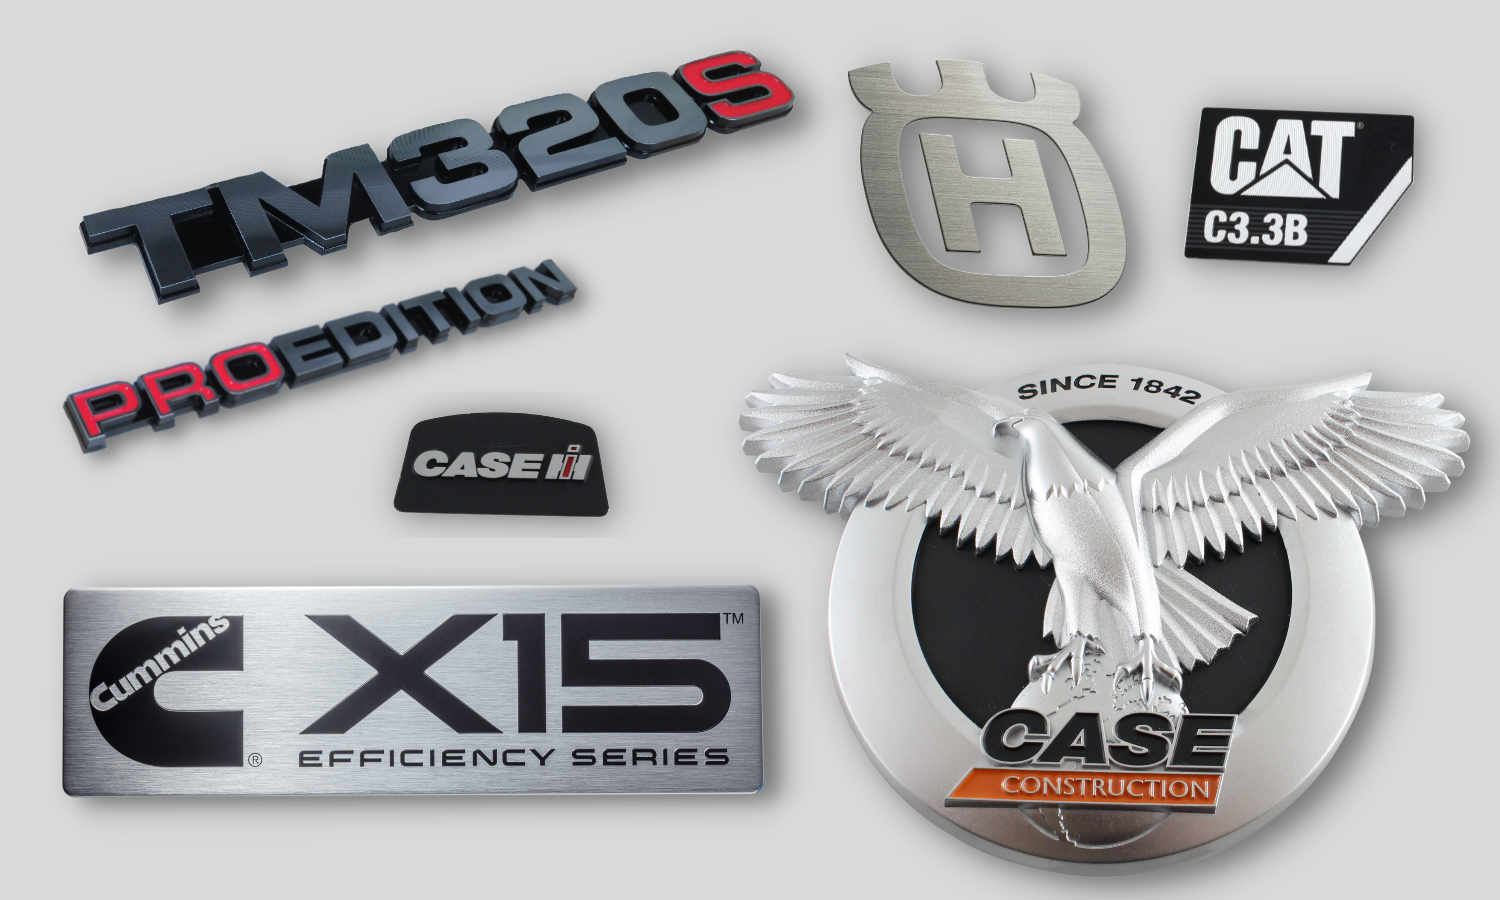 Collage of logos and name plates used on construction and agriculture machinery. Horizontally diamond cut chrome and red letters with black background TM320S and PROEDITION. Black trapezoid badge with raised CASE chrome letters. Large rectangle with horizontal brushing and recessed black text reading CX15 Efficiency Series. Circle badge with intricately detailed eagle with feathers and text reading CASE Construction. Horizontally brushed letter H. Black small rectangle with raised chrome CAT letters.